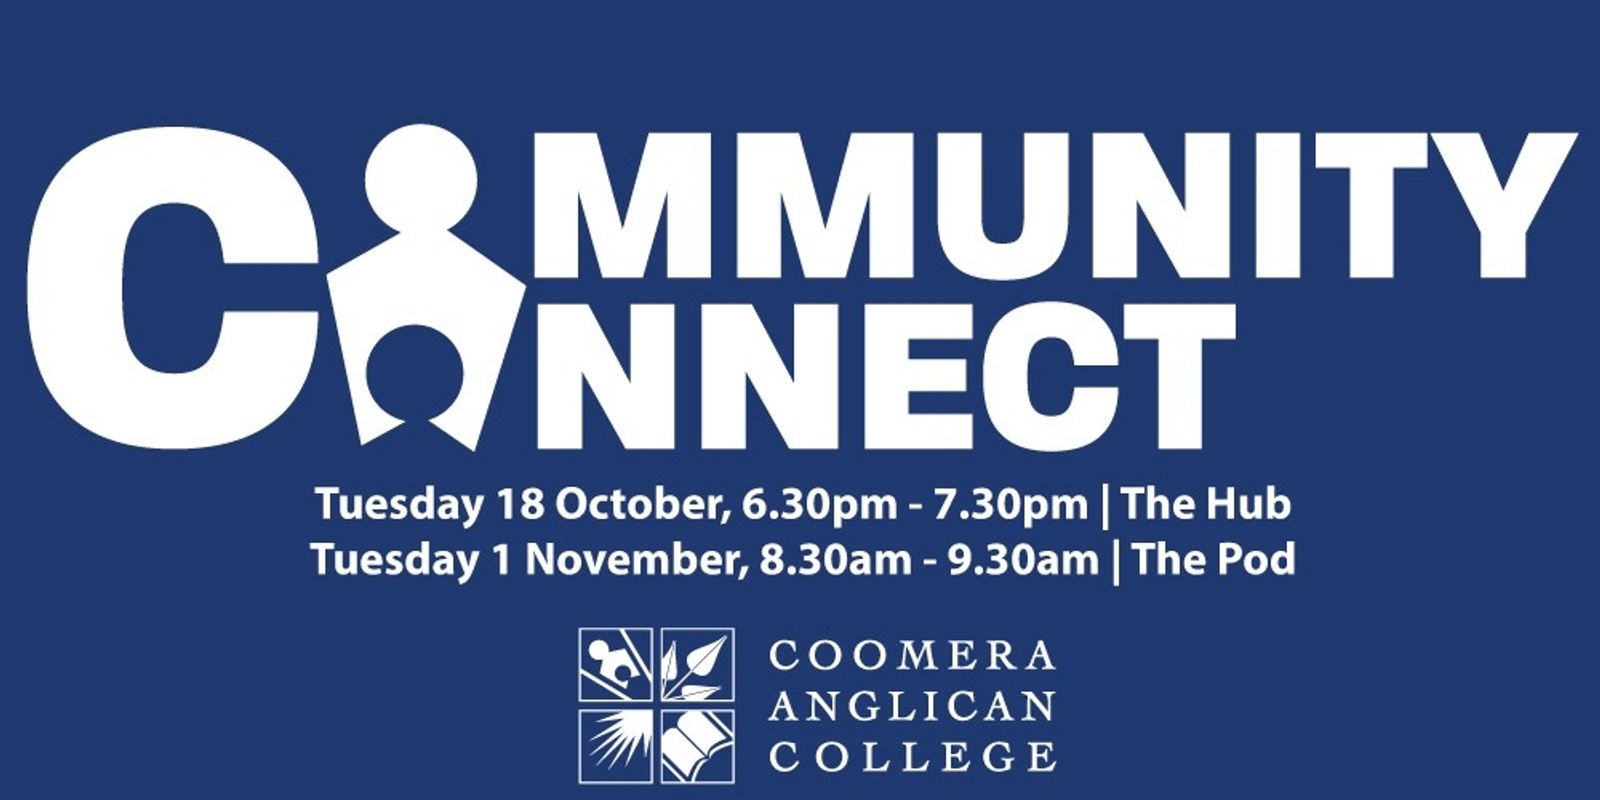 Banner image for Community Connect - Tuesday 1 November